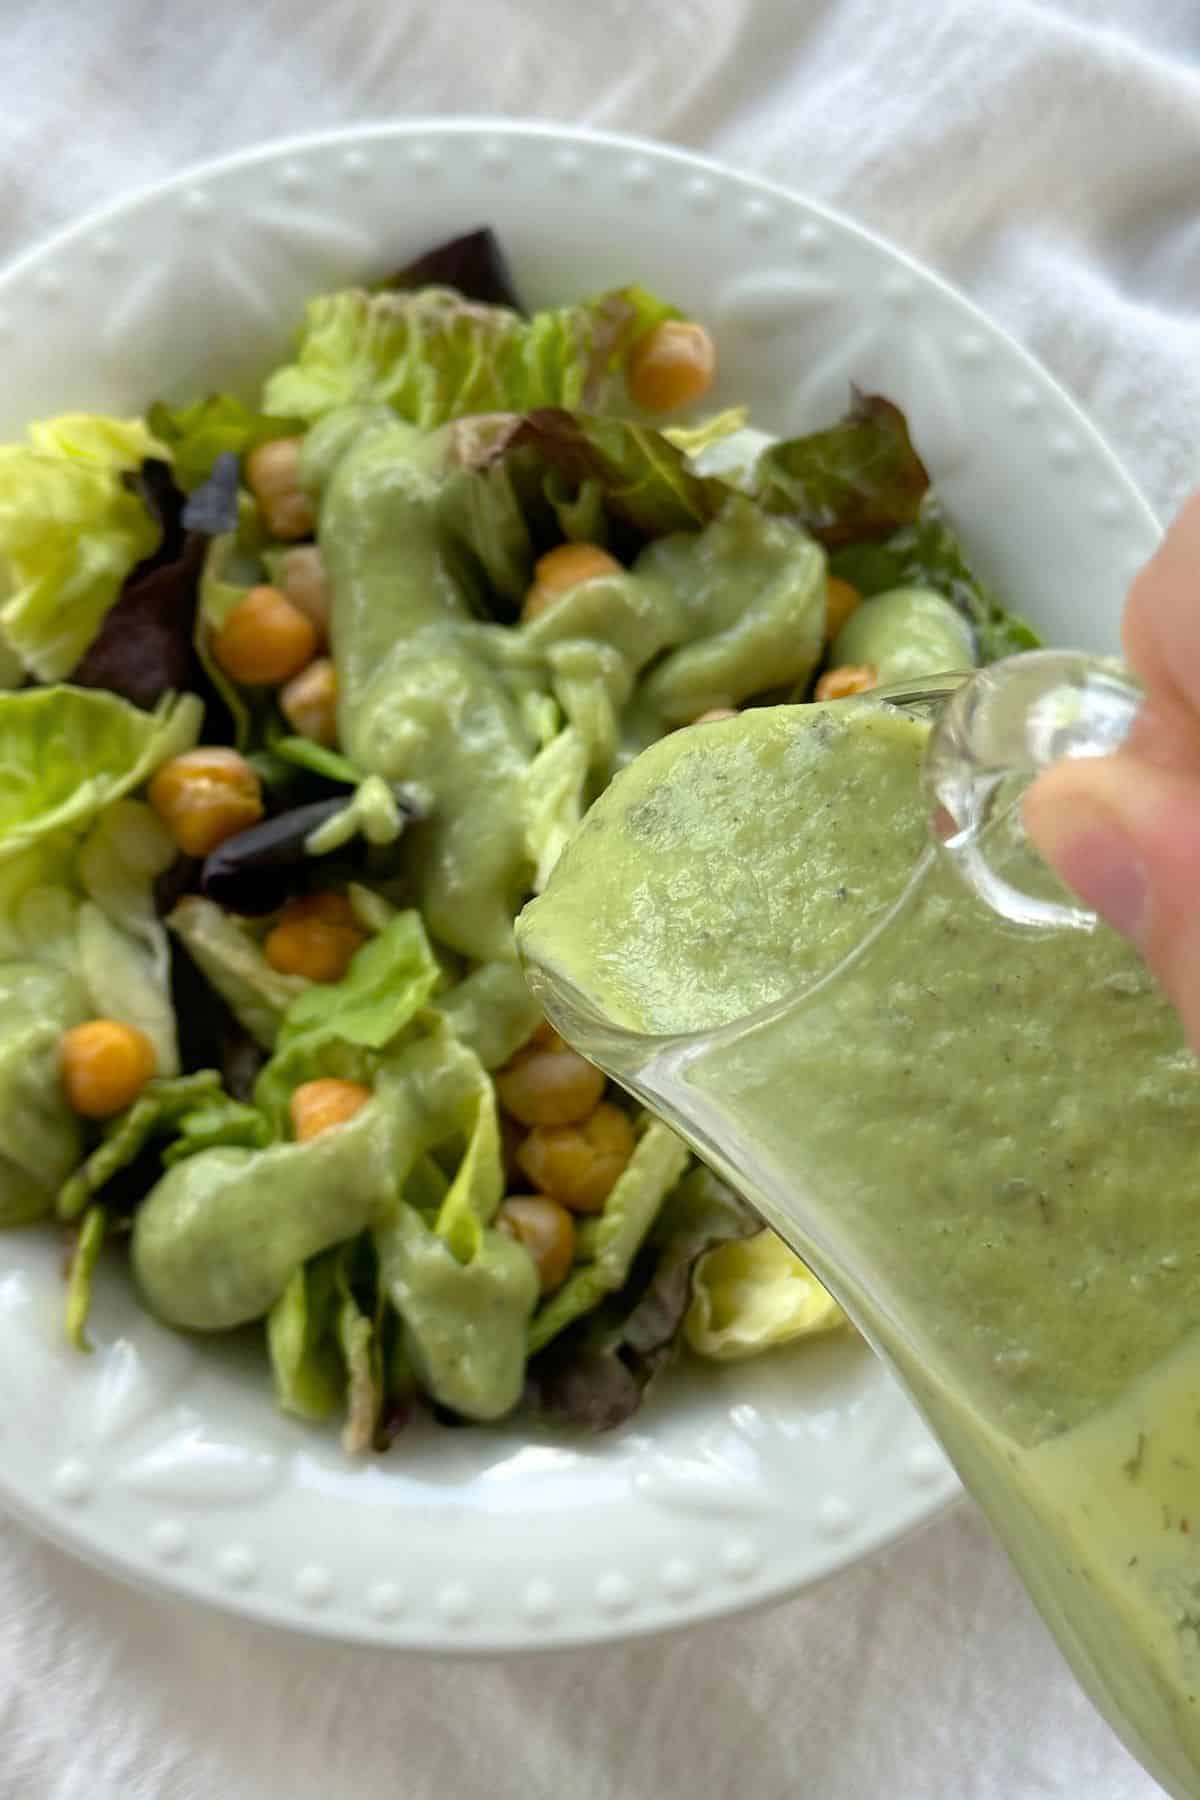 Vegan avocado ranch dressing being poured on top of a salad with green and red lettuce and roasted chickpeas.